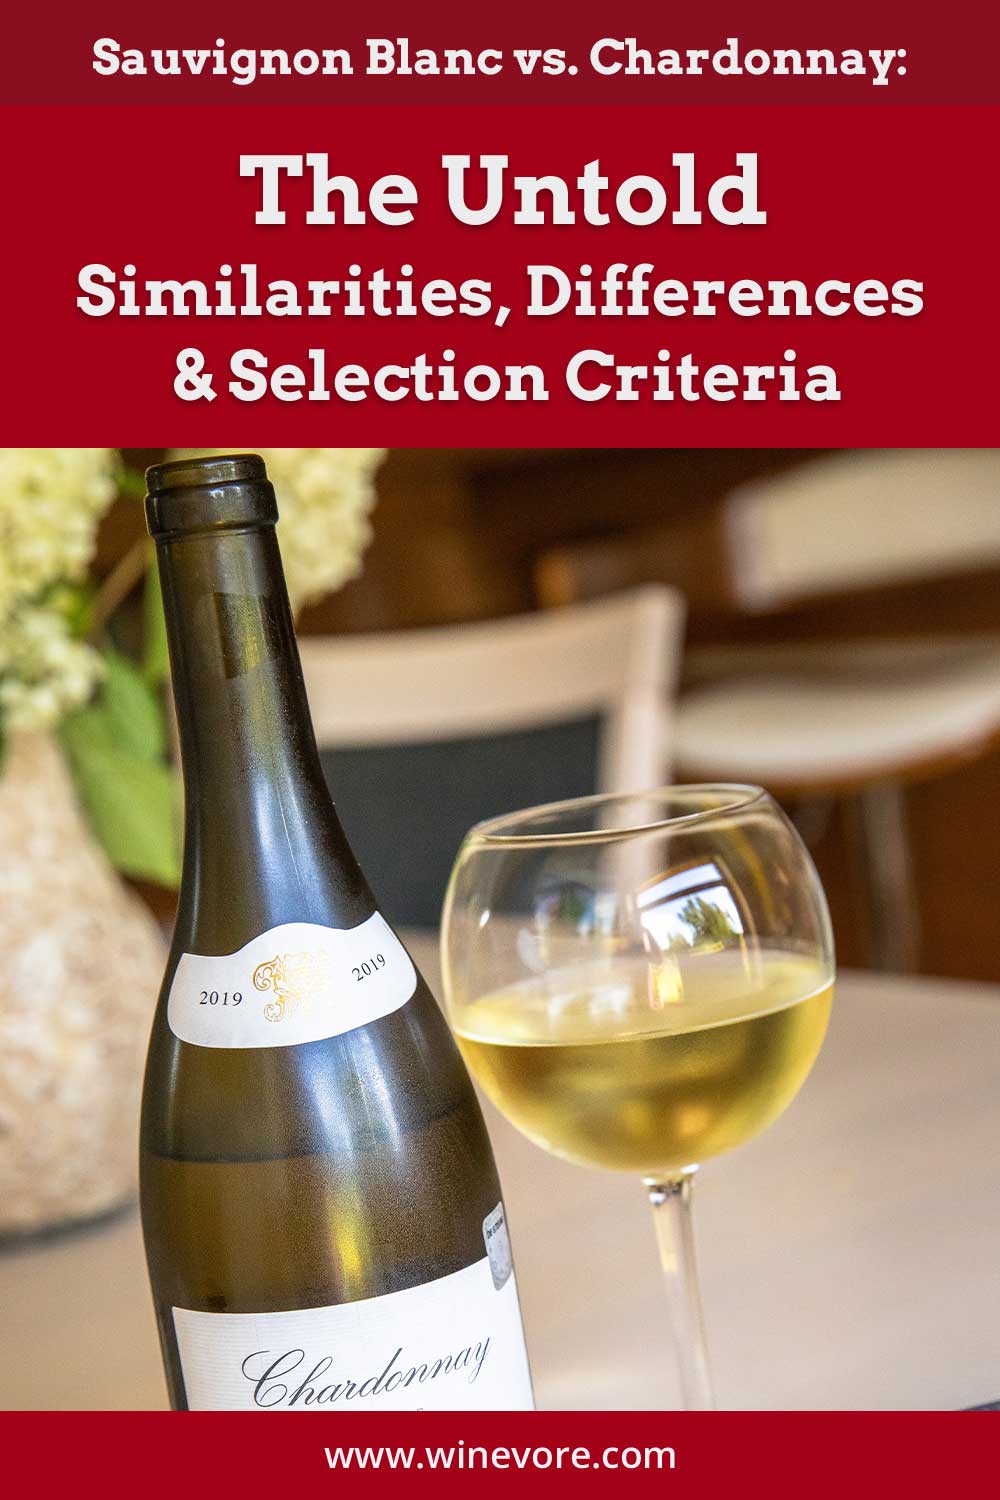 A wine glass with wine in it near a bottle - Sauvignon Blanc vs. Chardonnay: The Similarities, Differences & Selection Criteria.